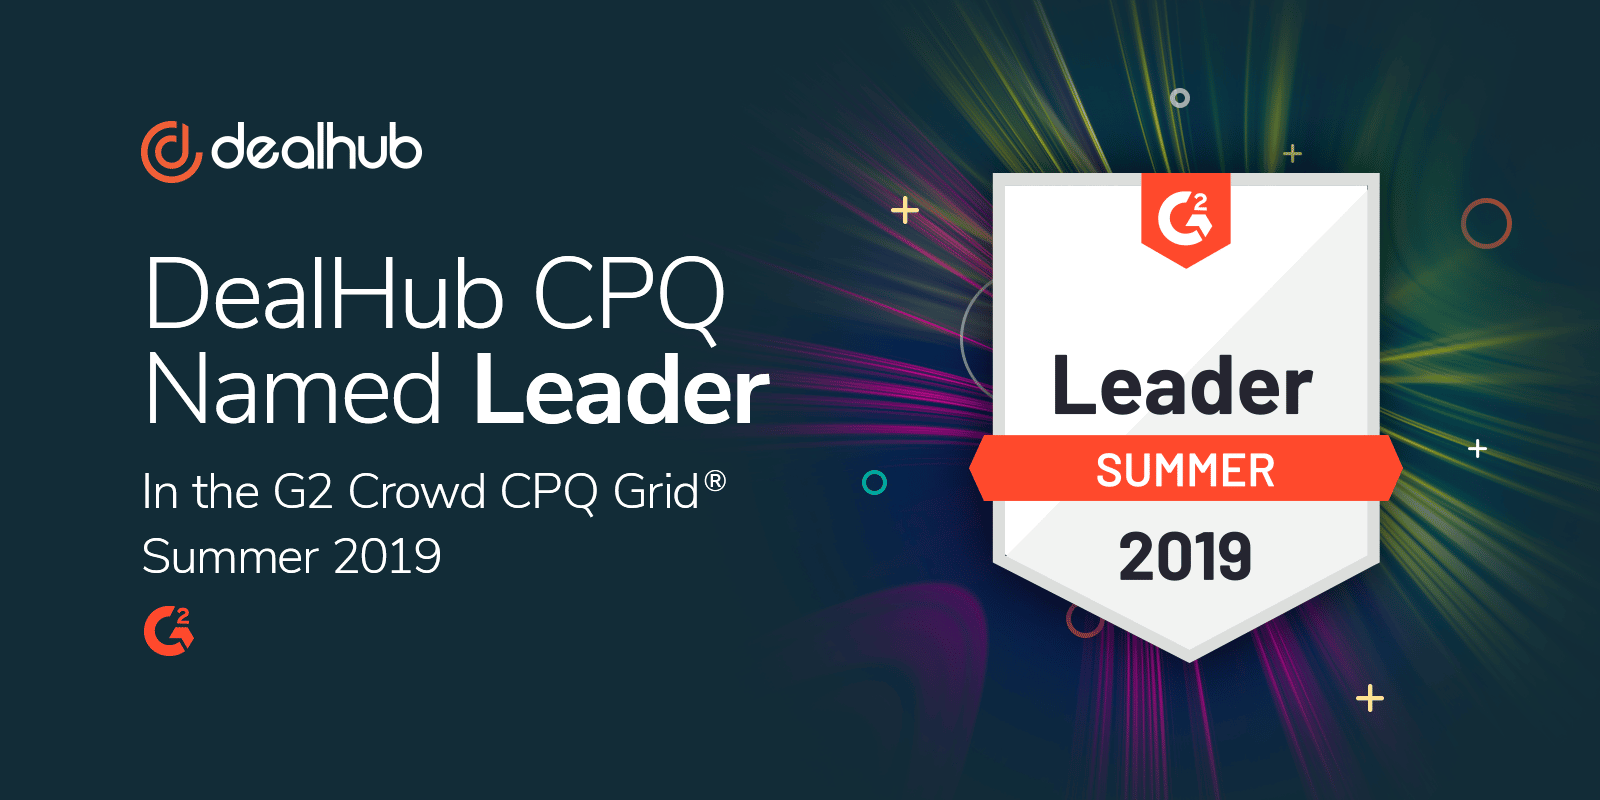 DealHub CPQ software industry leader